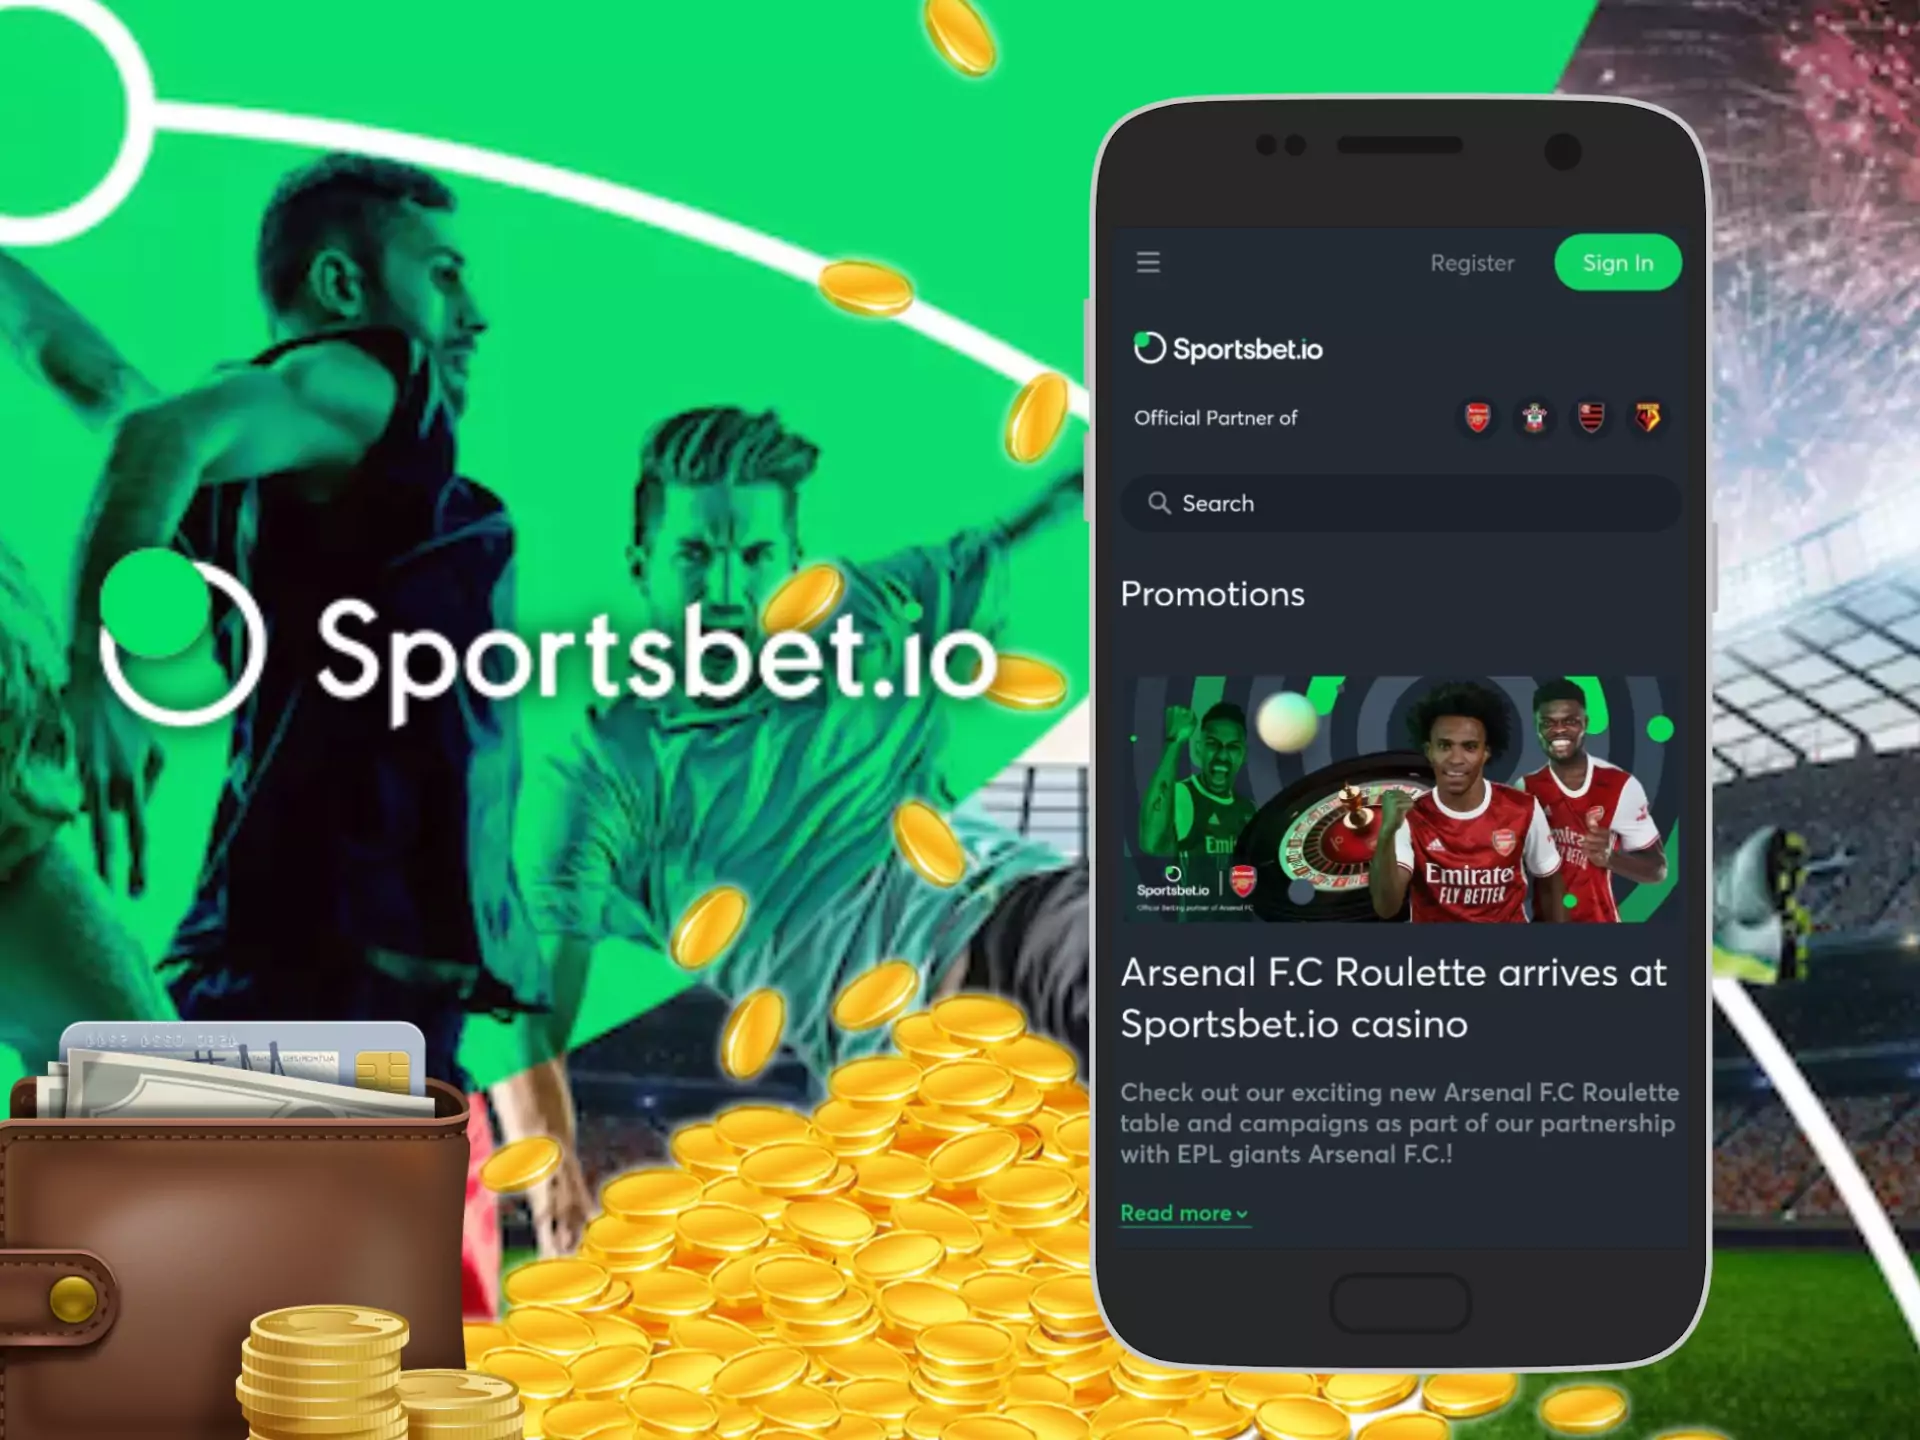 Sign up for Sportbet and get bonuses for betting via the app.